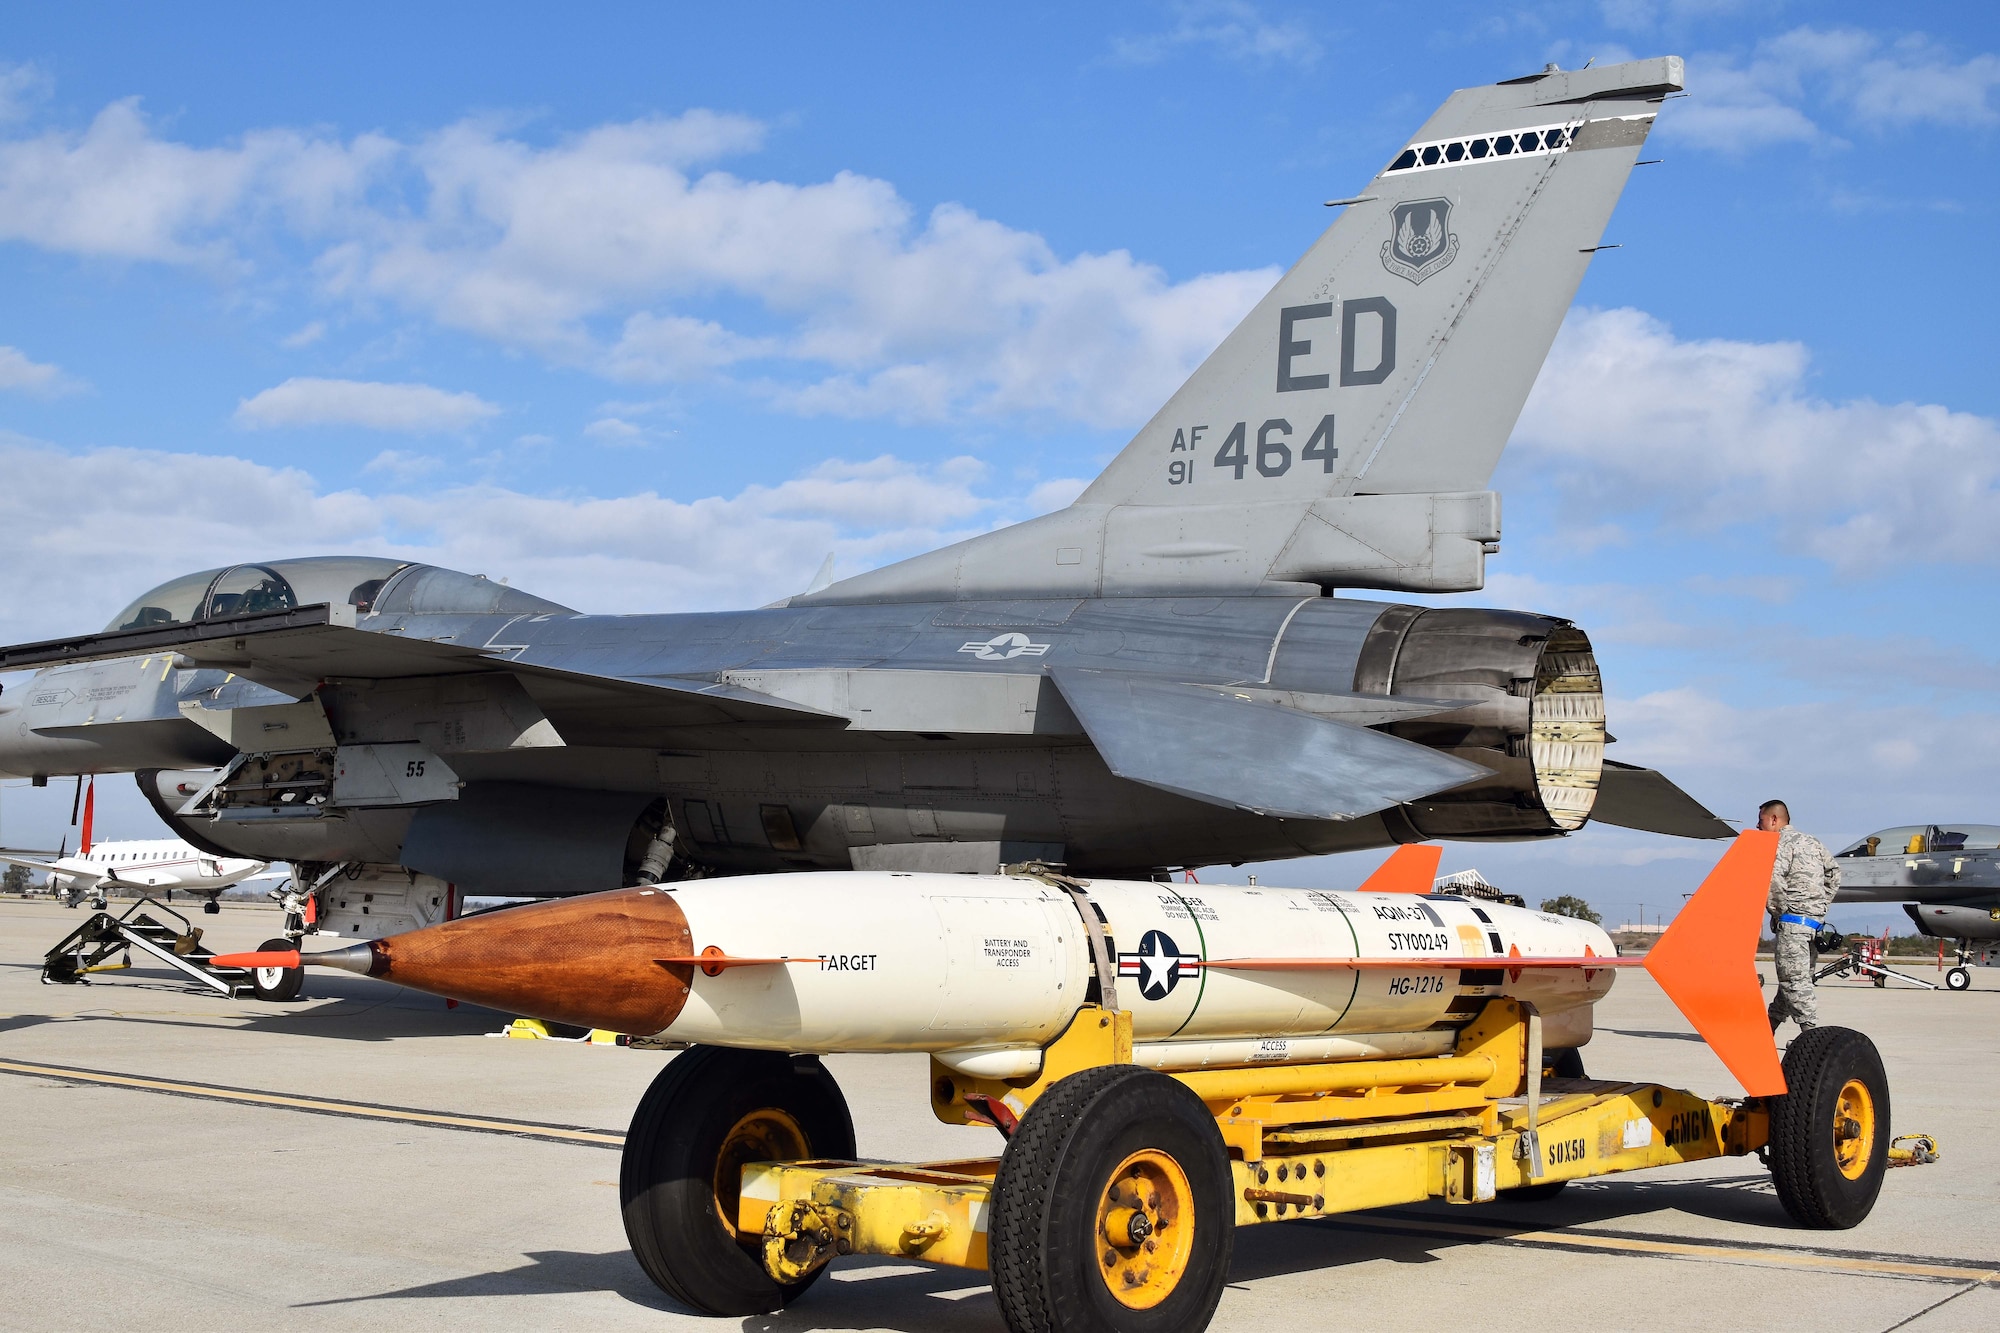 An Edwards Air Force Base F-16 sits at Naval Air Station Point Mugu, California, along with an AQM-37D supersonic target, Nov. 28, 2018. Two F-16s and maintenance Airmen from Edwards assisted the U.S. Navy and Royal Australian Navy with a test of a RAN ship’s combat system late last year. (U.S. Navy photo by BU3 Dakota Fink)